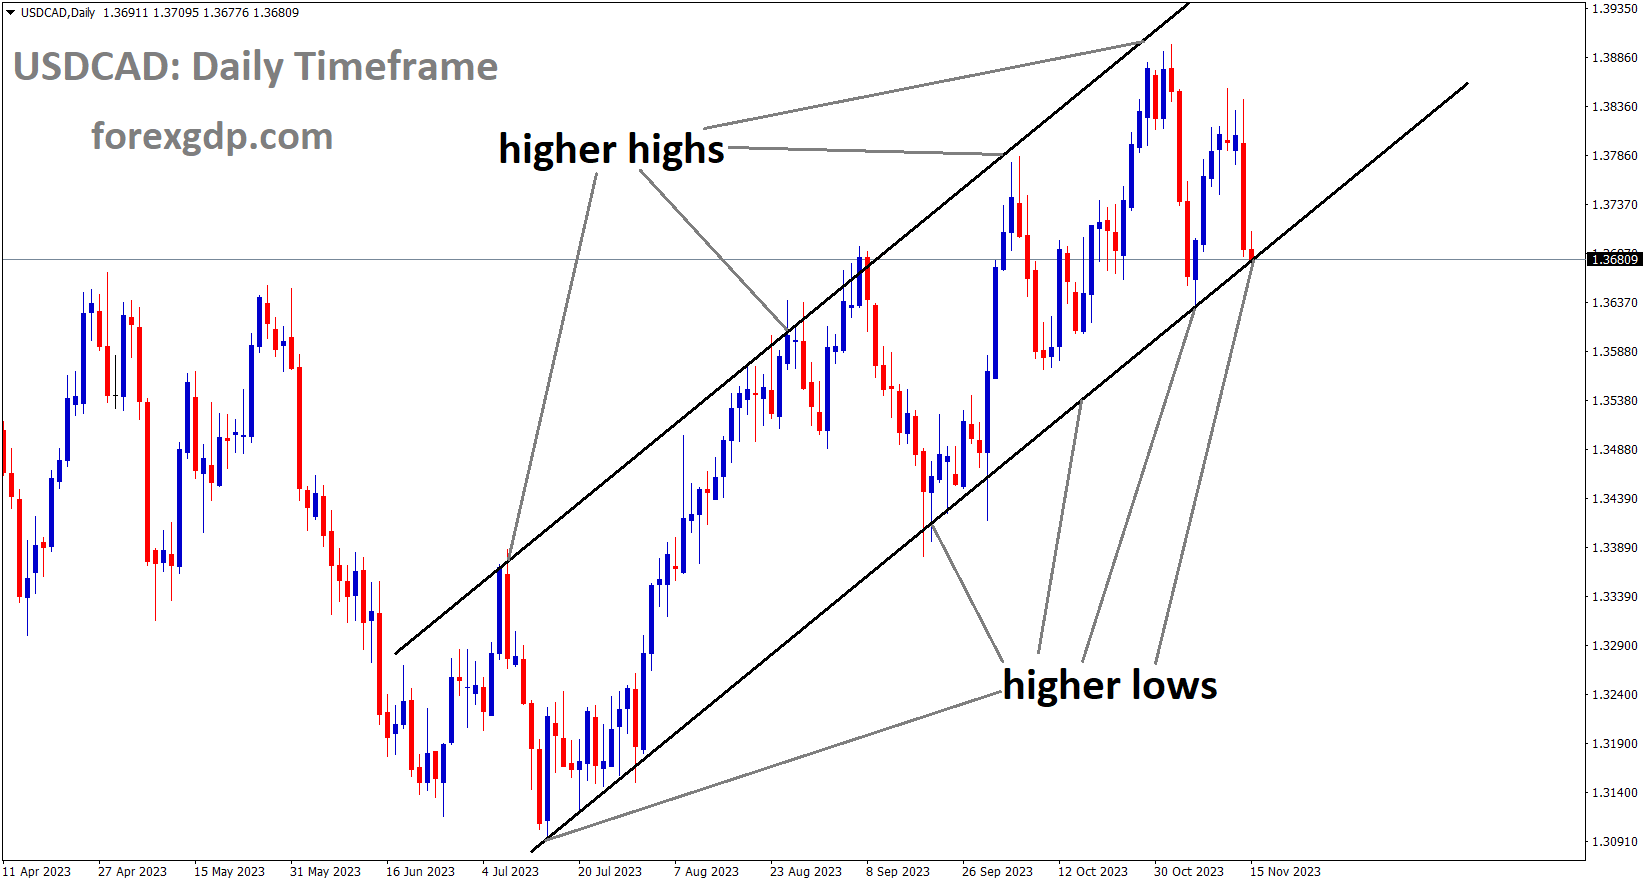 USDCAD is moving in an Ascending channel and the market has reached the higher low area of the channel